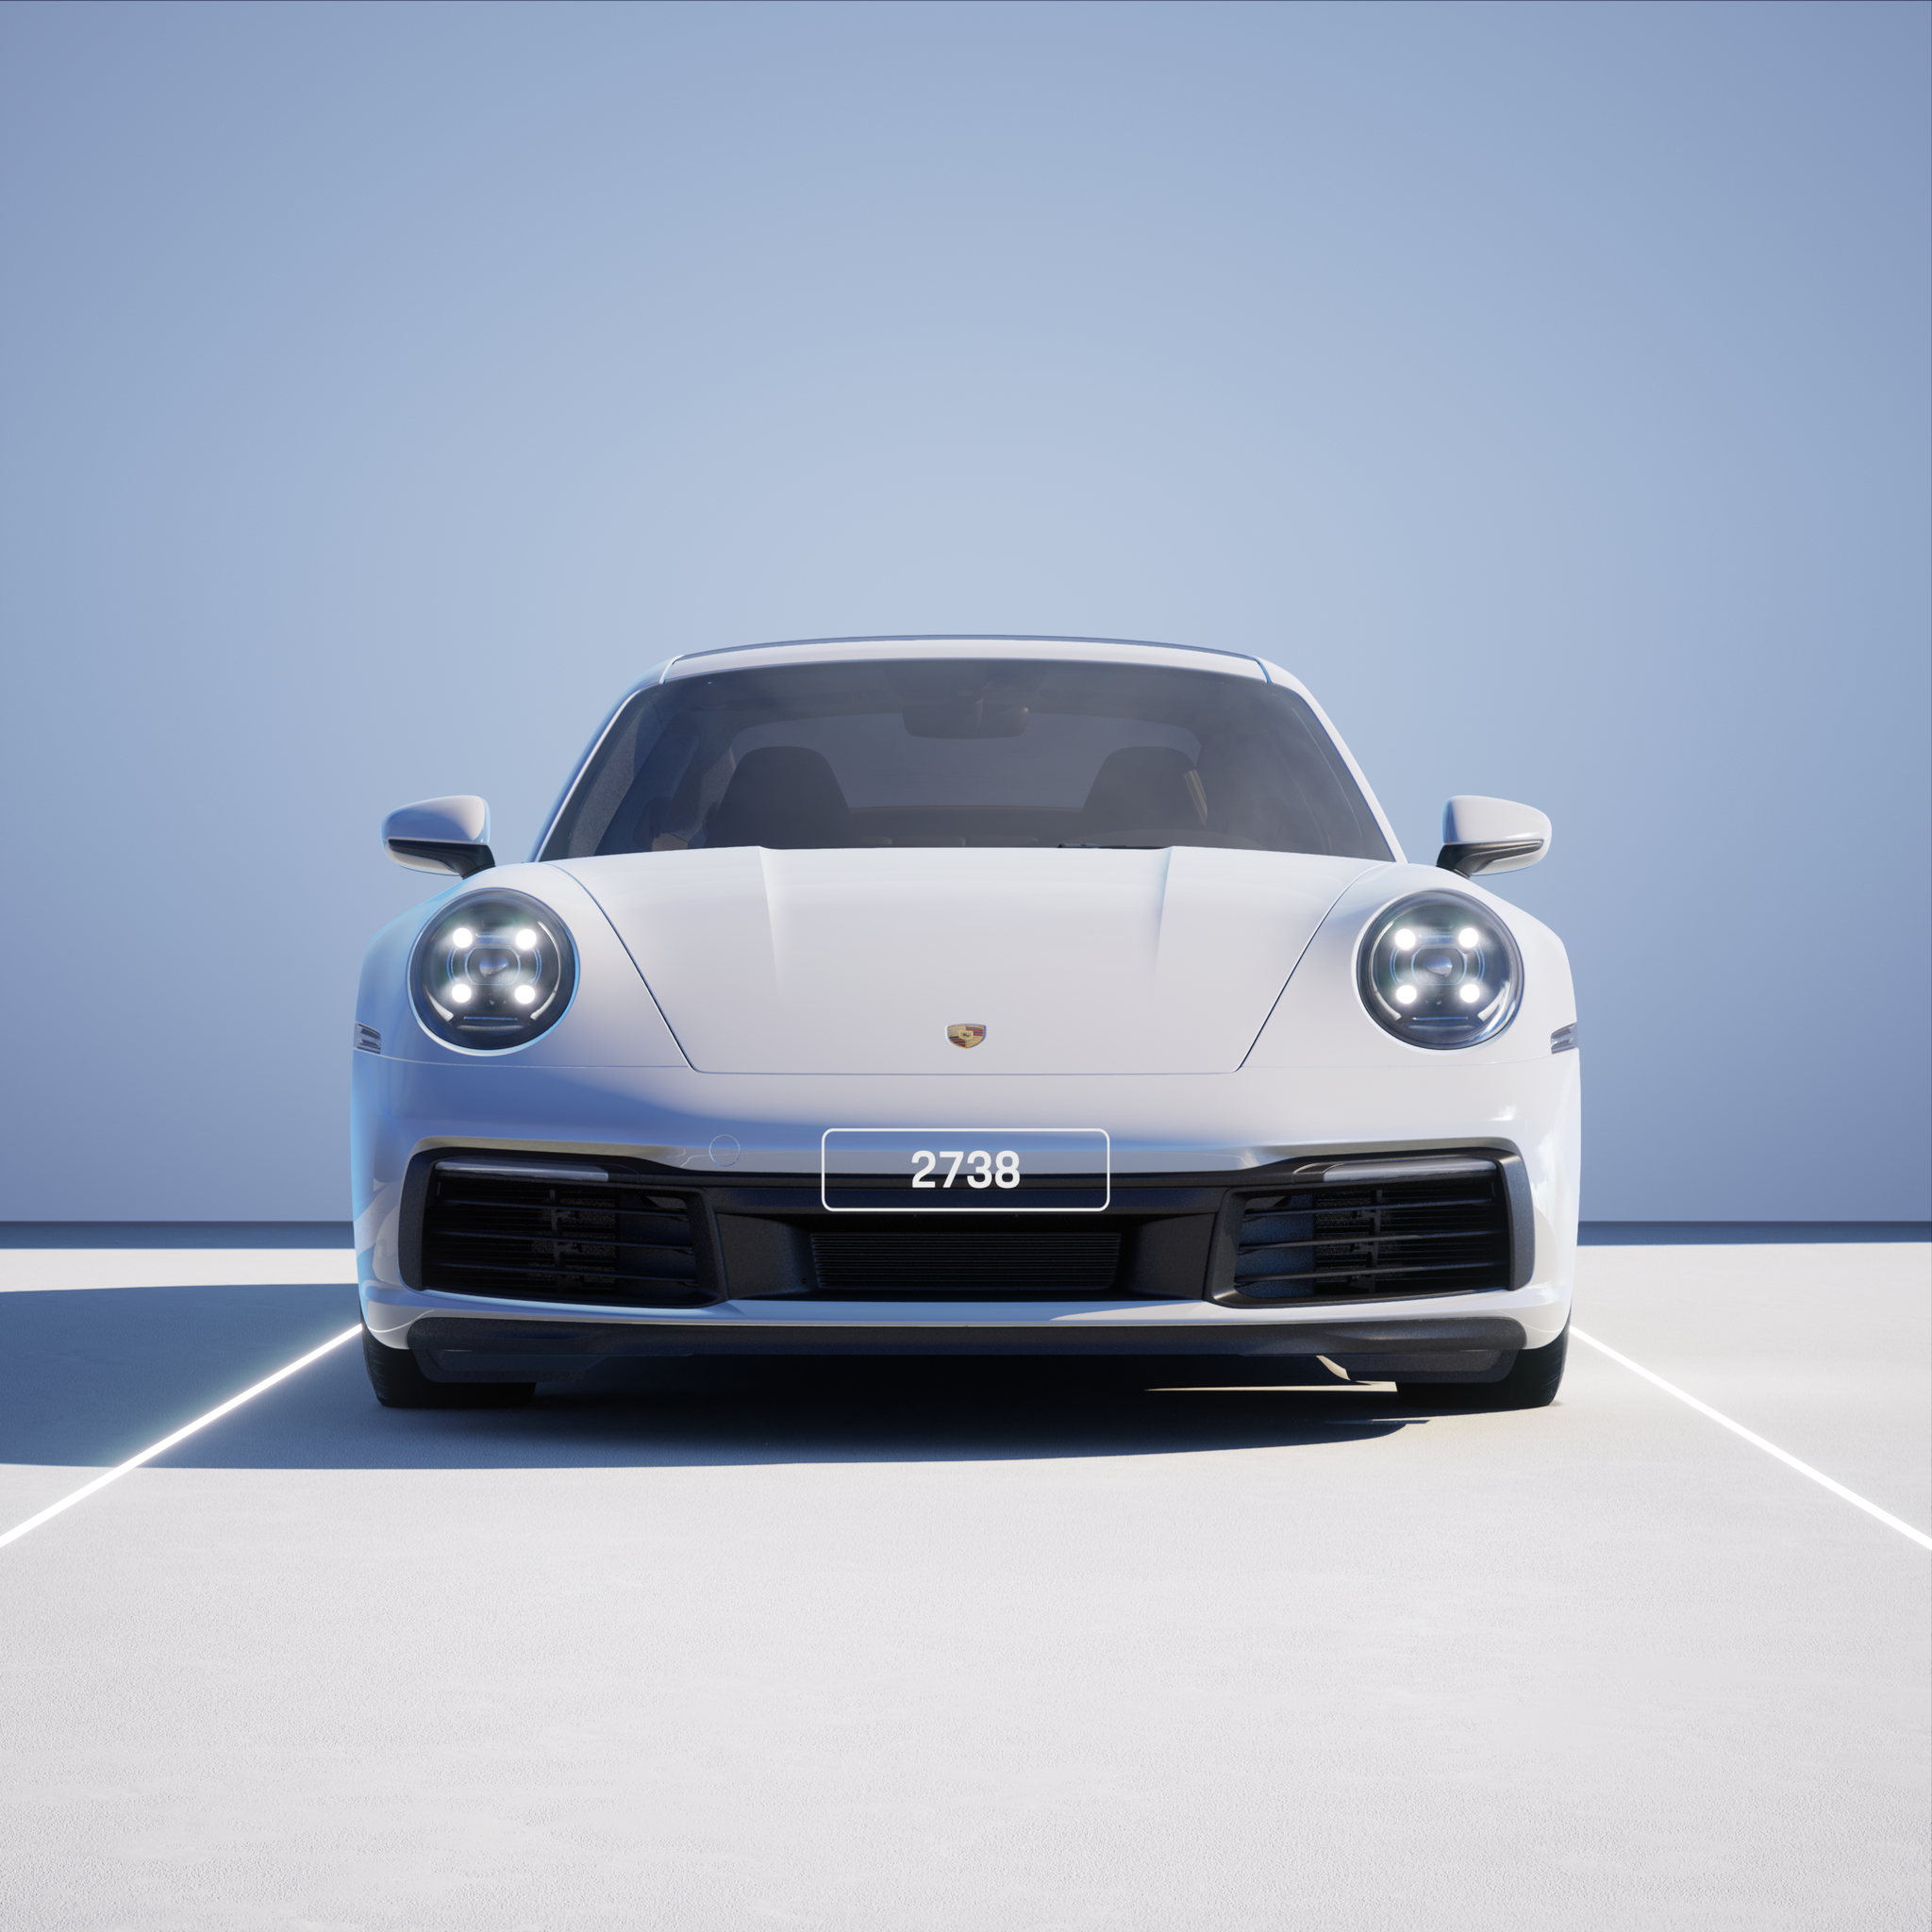 The PORSCHΞ 911 2738 image in phase